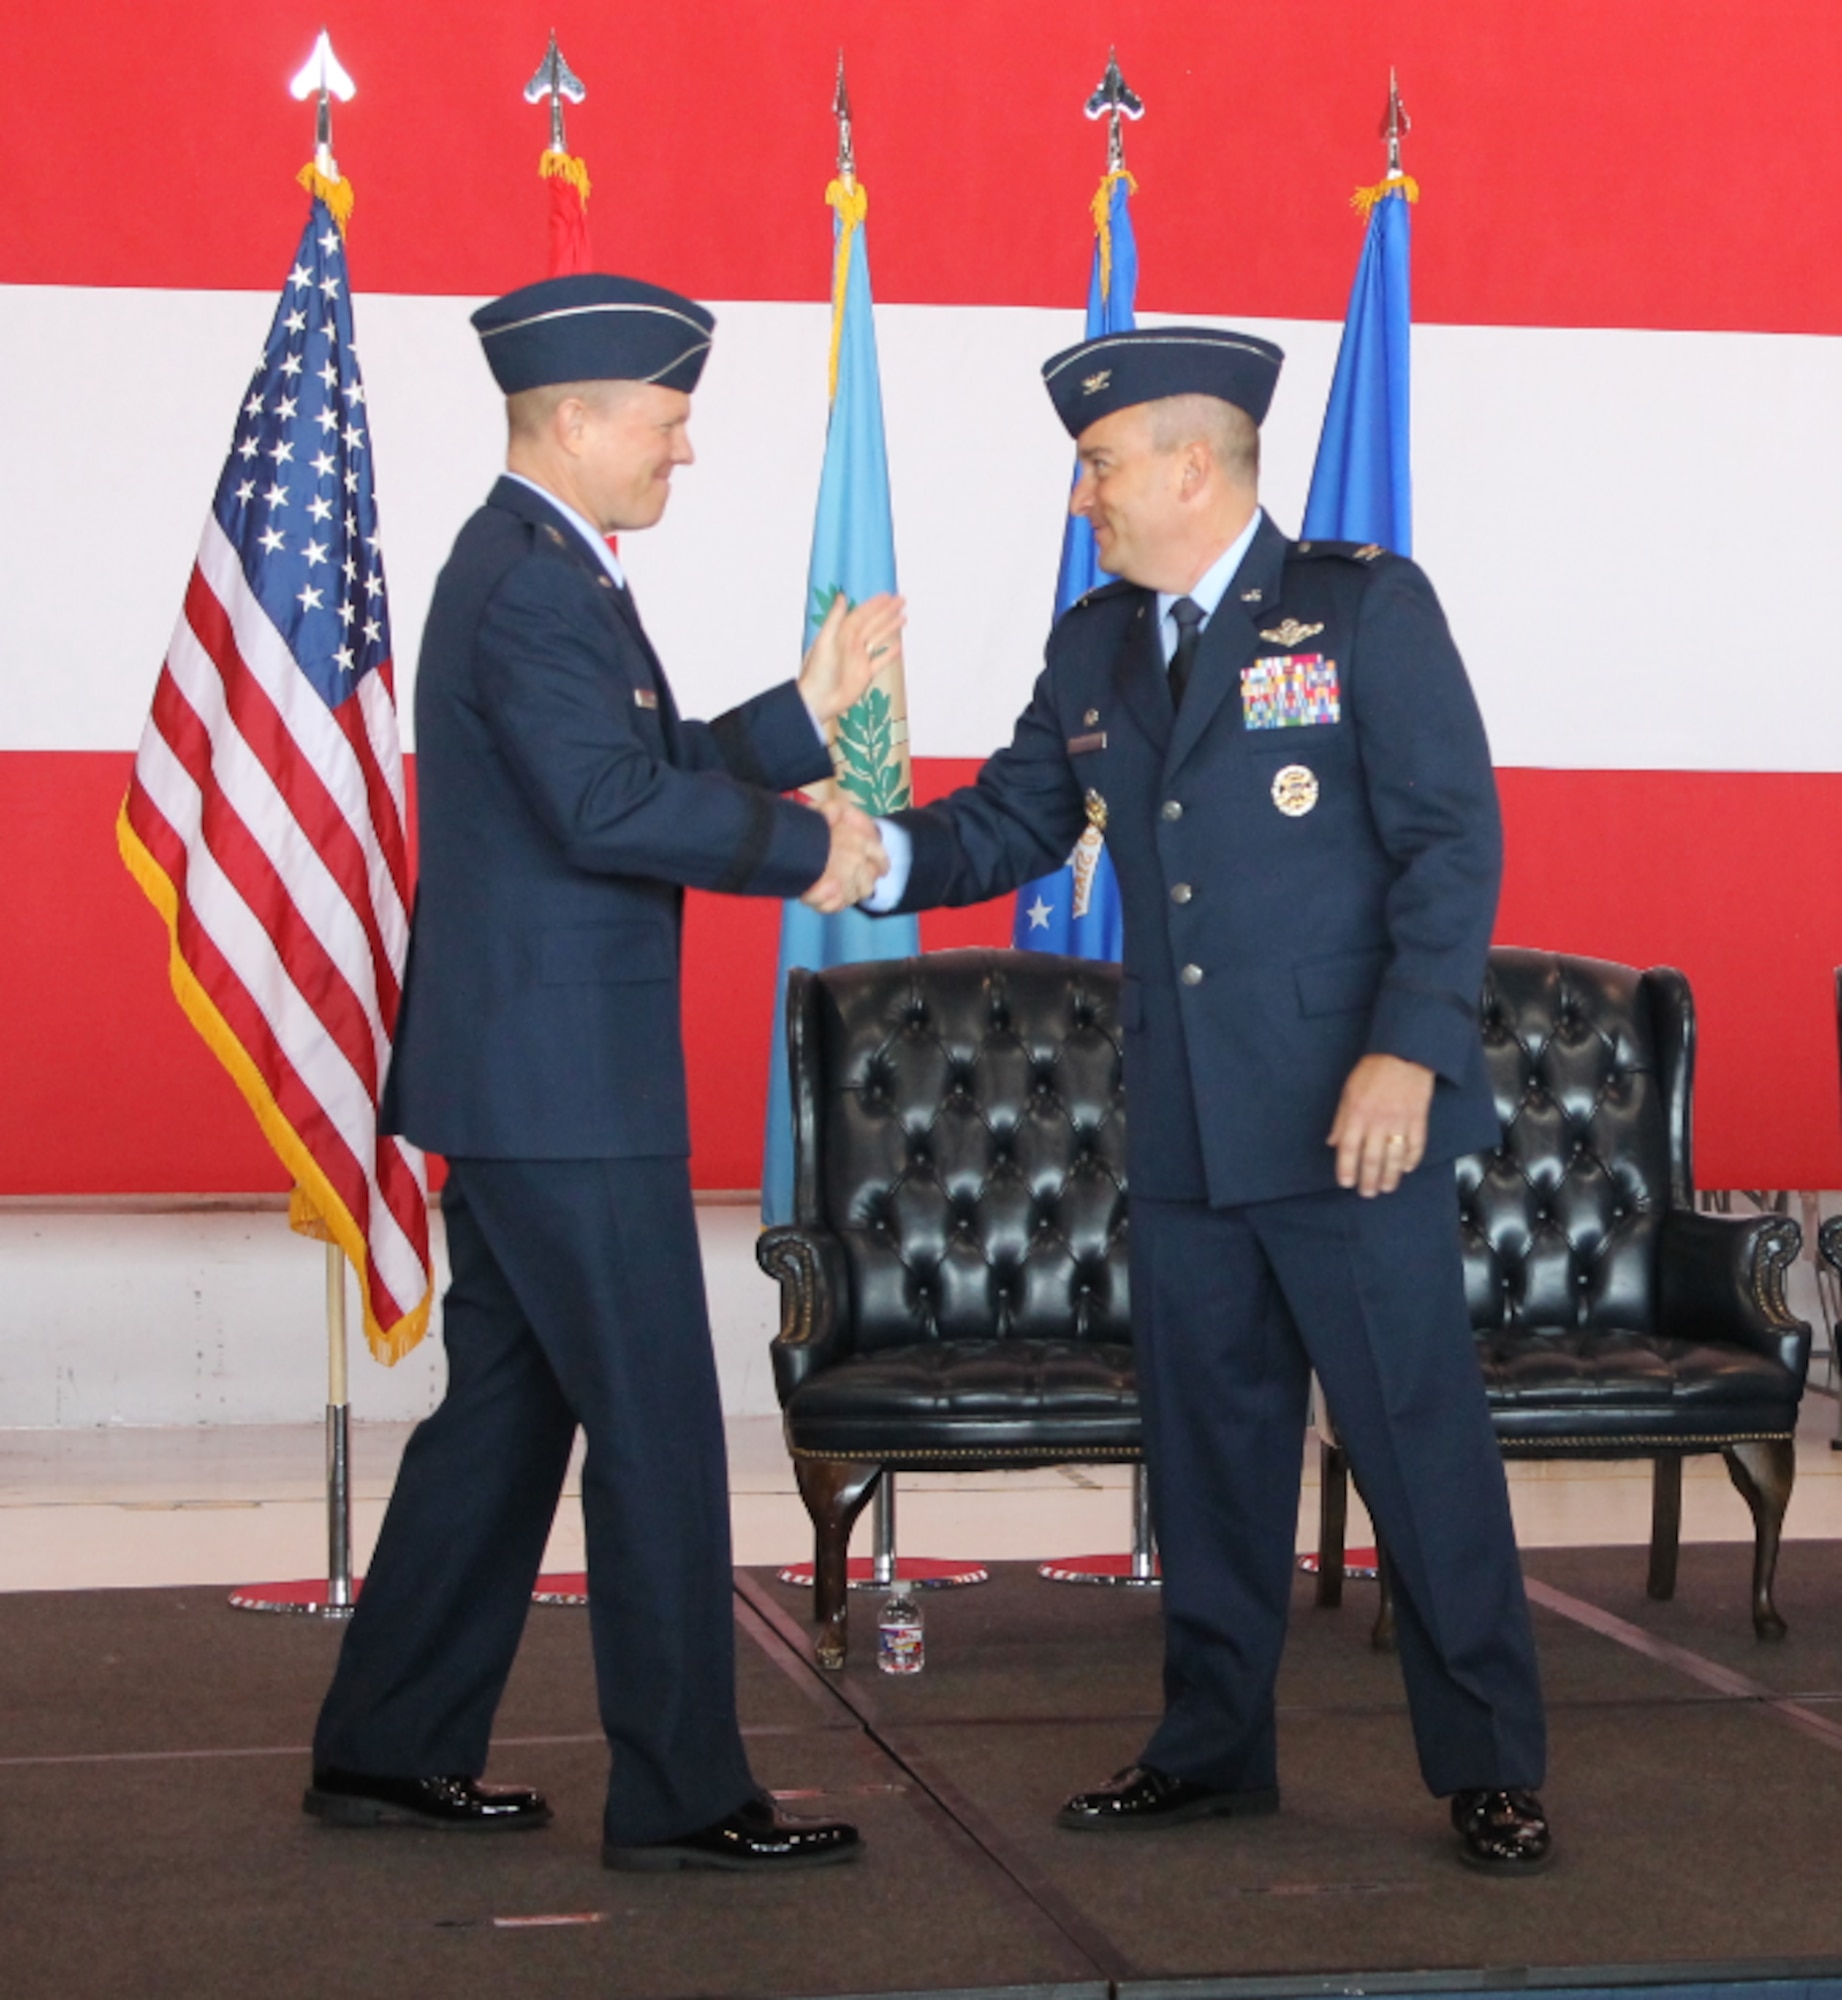 Col. Alain D. Poisson, right, is welcomed as the 552nd Air Control Wing commander by Maj. Gen. Andrew A. Croft, 12th Air Force (Air Forces Southern) commander, during the change of command ceremony June 10, 2019, Tinker Air Force Base, Oklahoma. Col. Geoffrey Weiss relinquished command of the 552 ACW to Col. Alain D. Poisson. (U.S. Air Force photo/2nd Lt. Ashlyn K. Paulson)